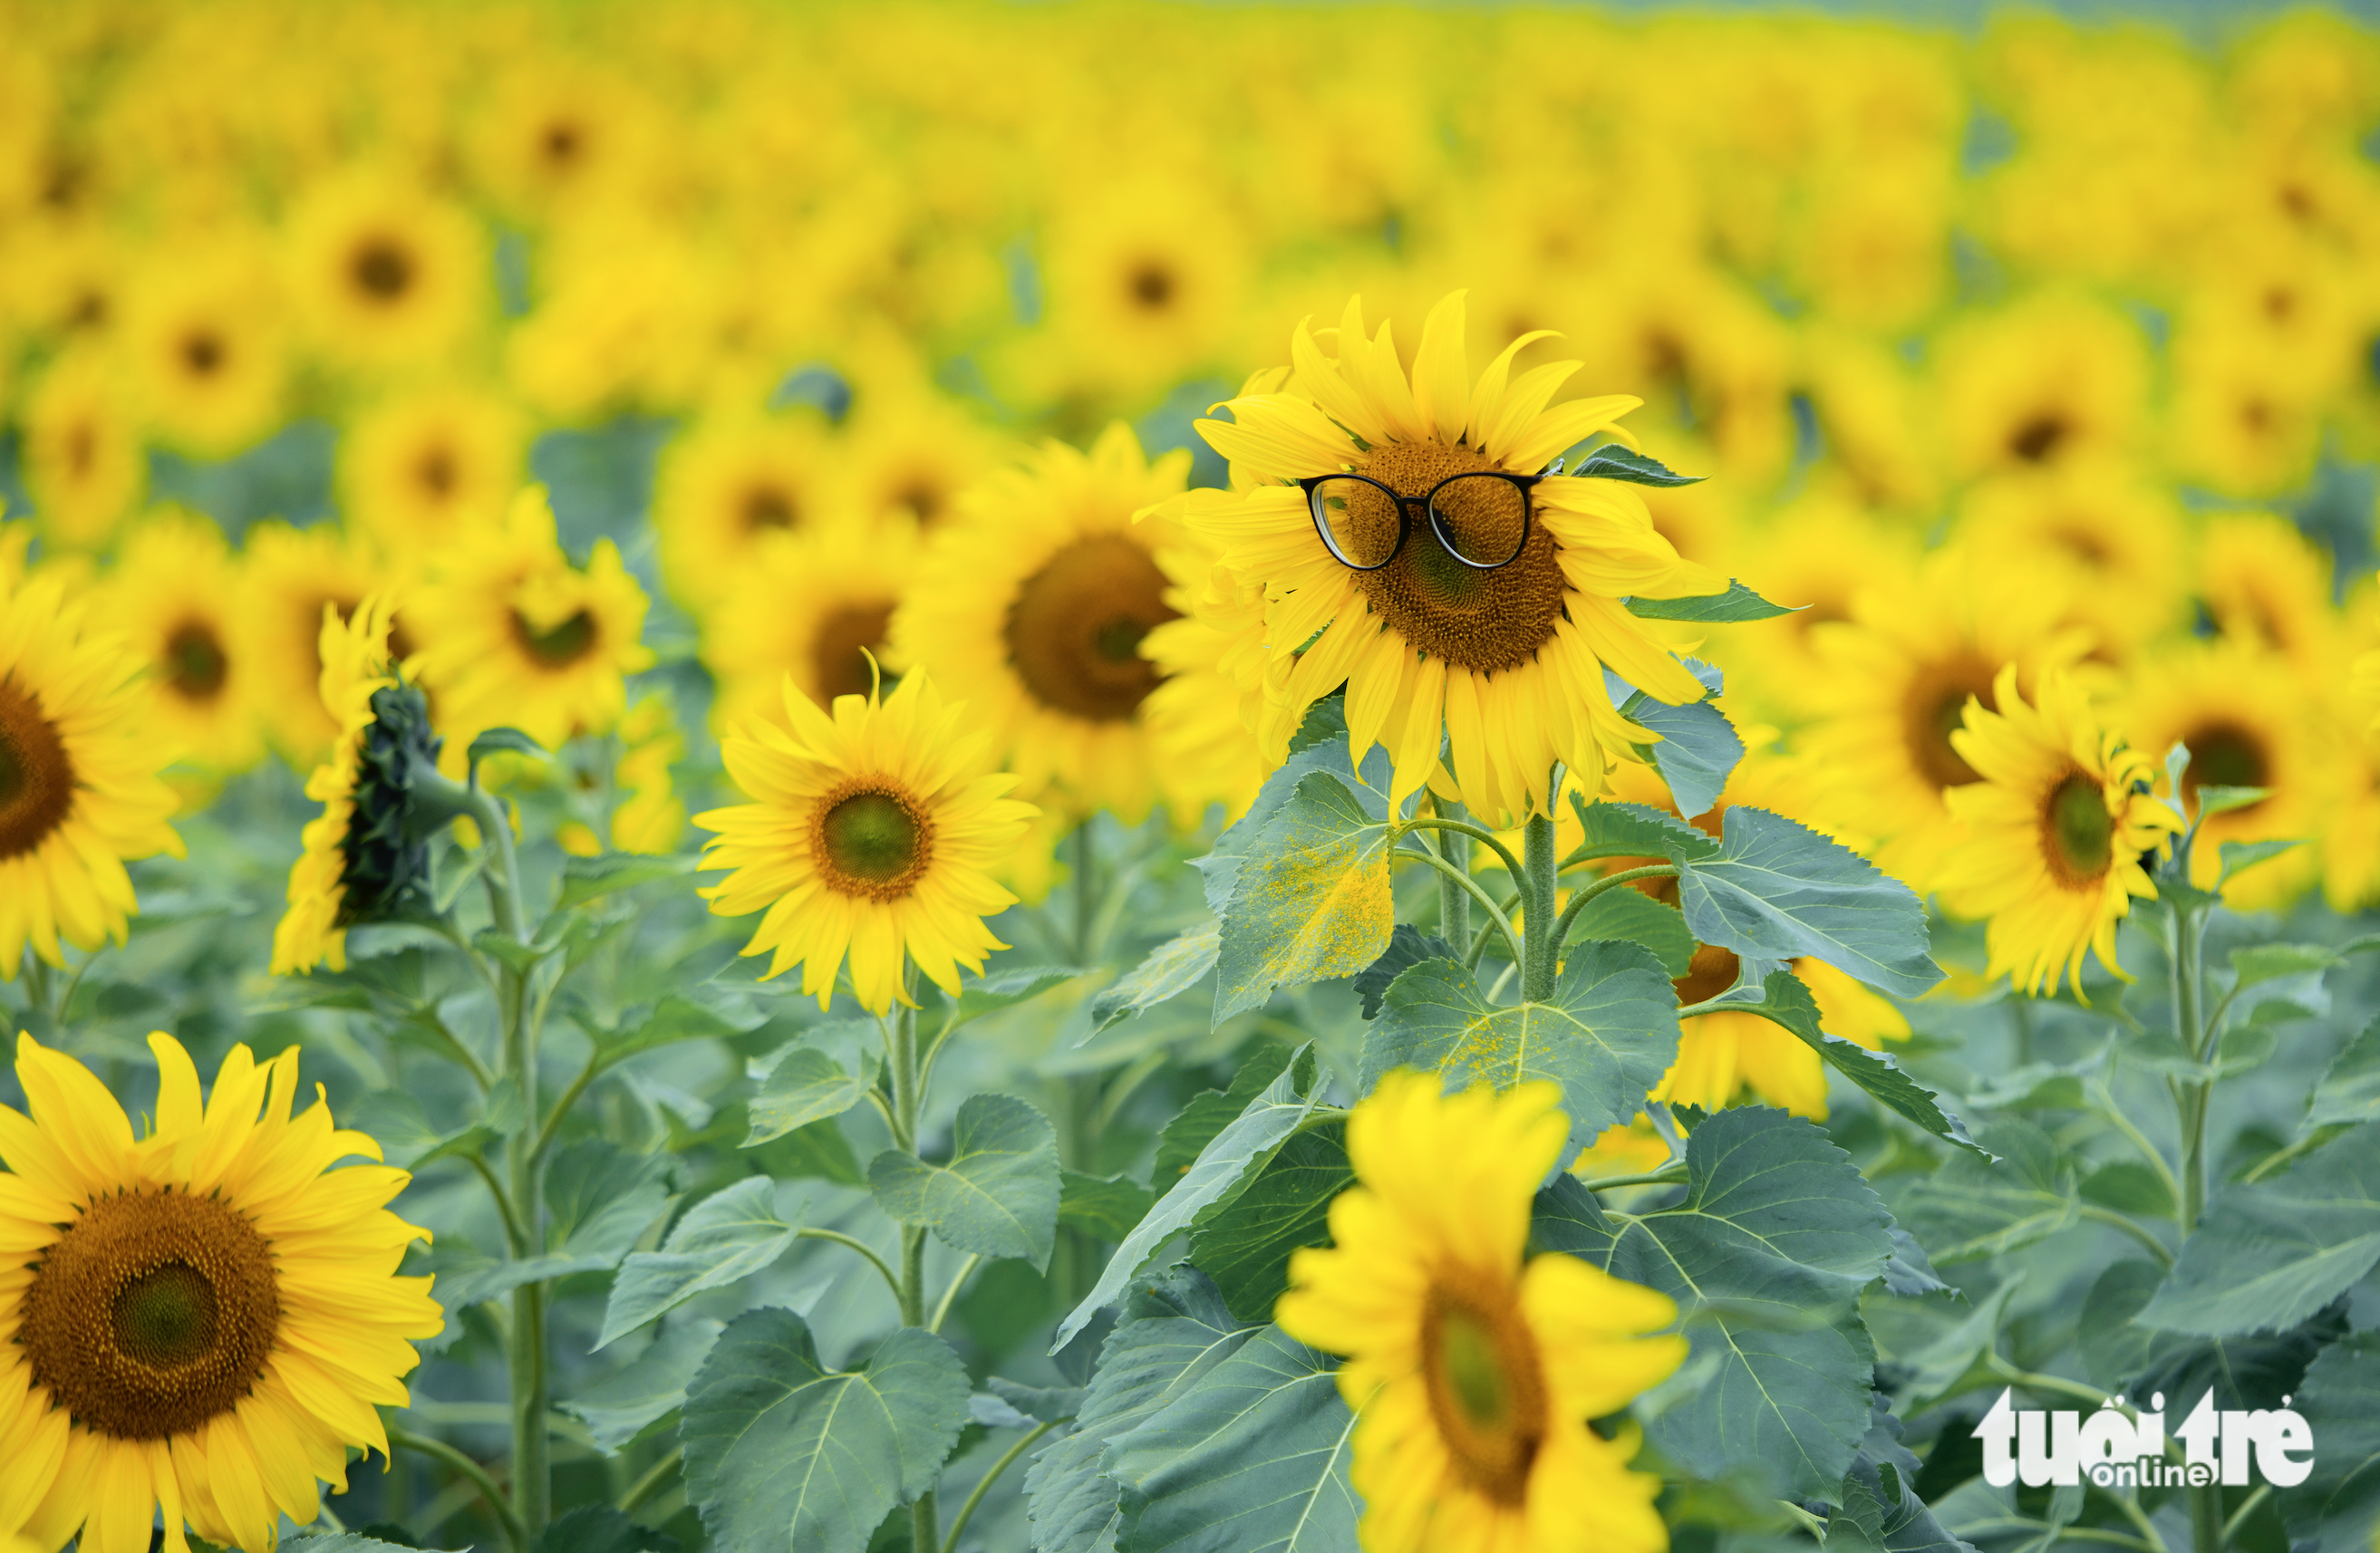 A blossoming sunflower field in Nghia Dan District, Nghe An Province, Vietnam. Photo: Rang Dong / Tuoi Tre